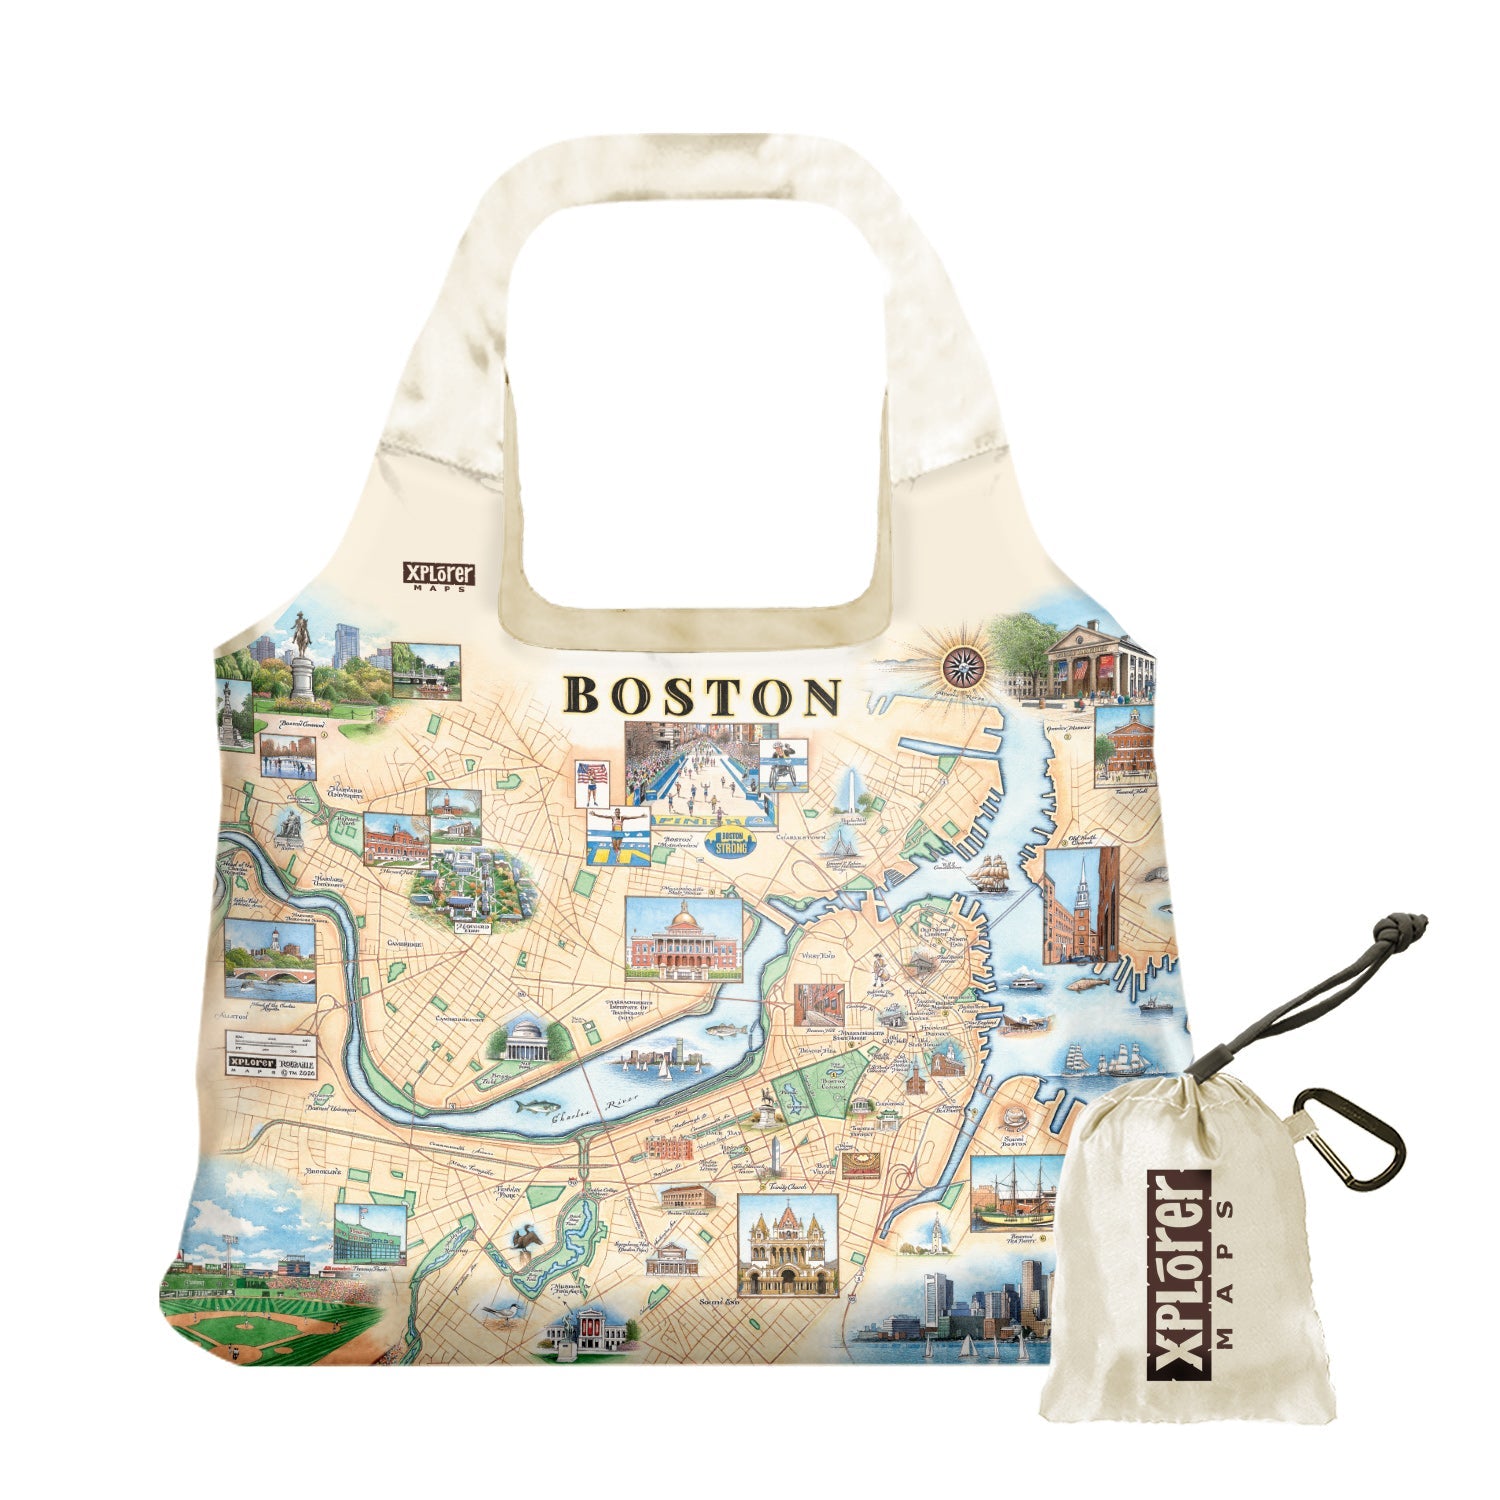 Boston city Map stuffable pouch tote bag in Earth Tone colors. Featuring Boston strong, Boston Marathon, Fenway Park, Museum of Fine Arts, Massachusetts State House, Bunker Hill Monument.